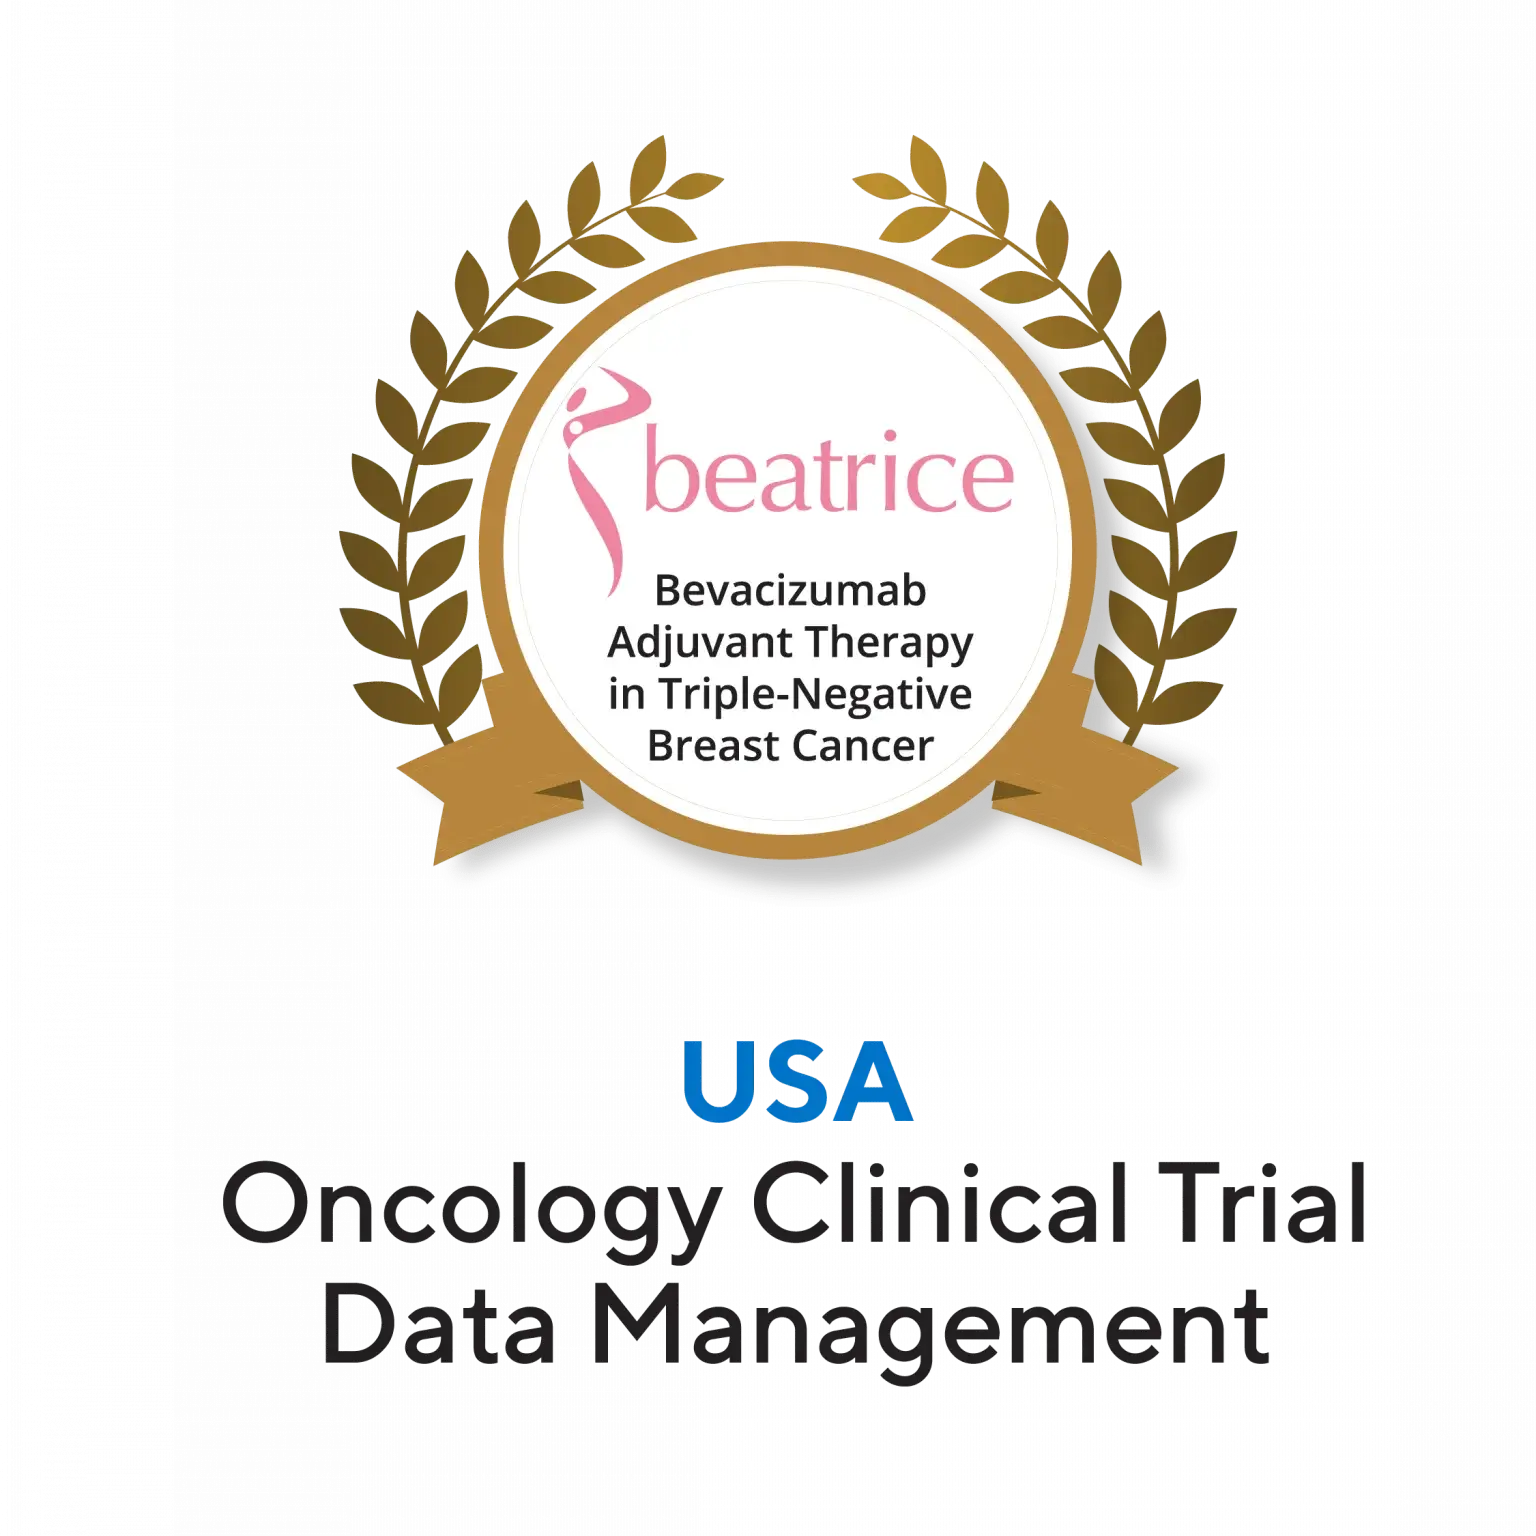 usa-oncology-clinical-trial-data-management-beacon-hospital-malaysia